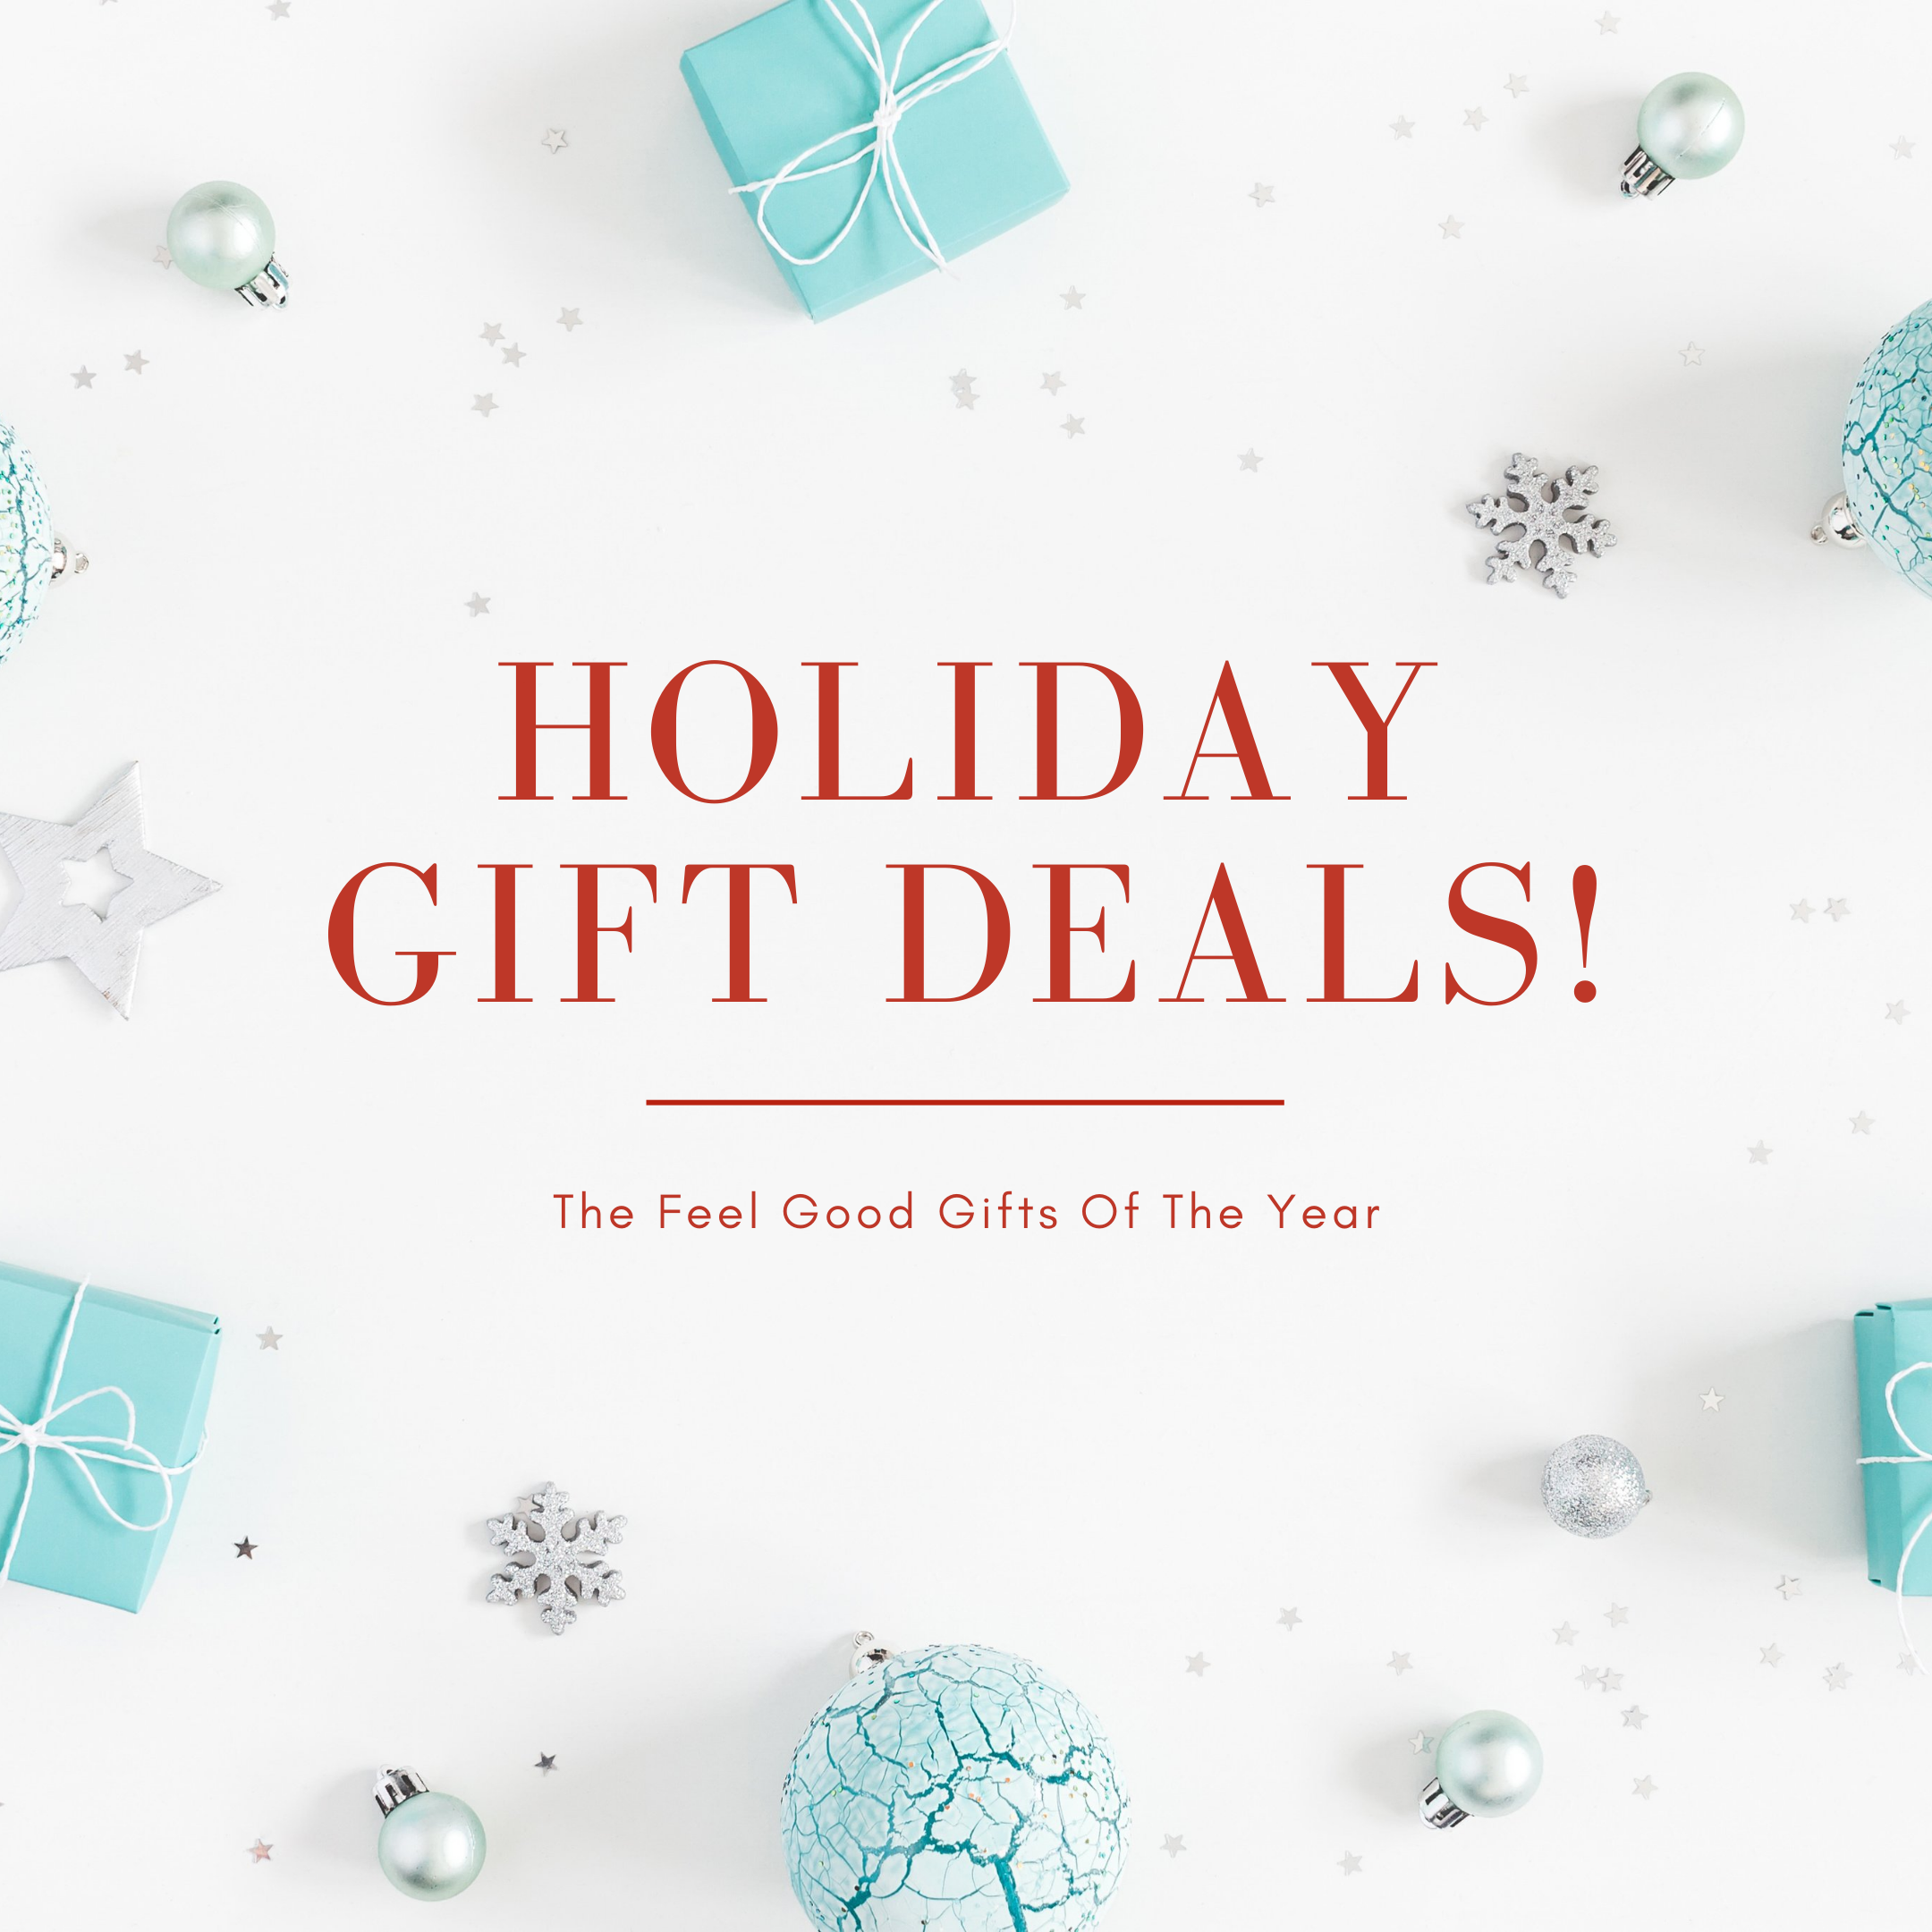 Limited Time Only Holiday Gift Deals! – Body + Soul